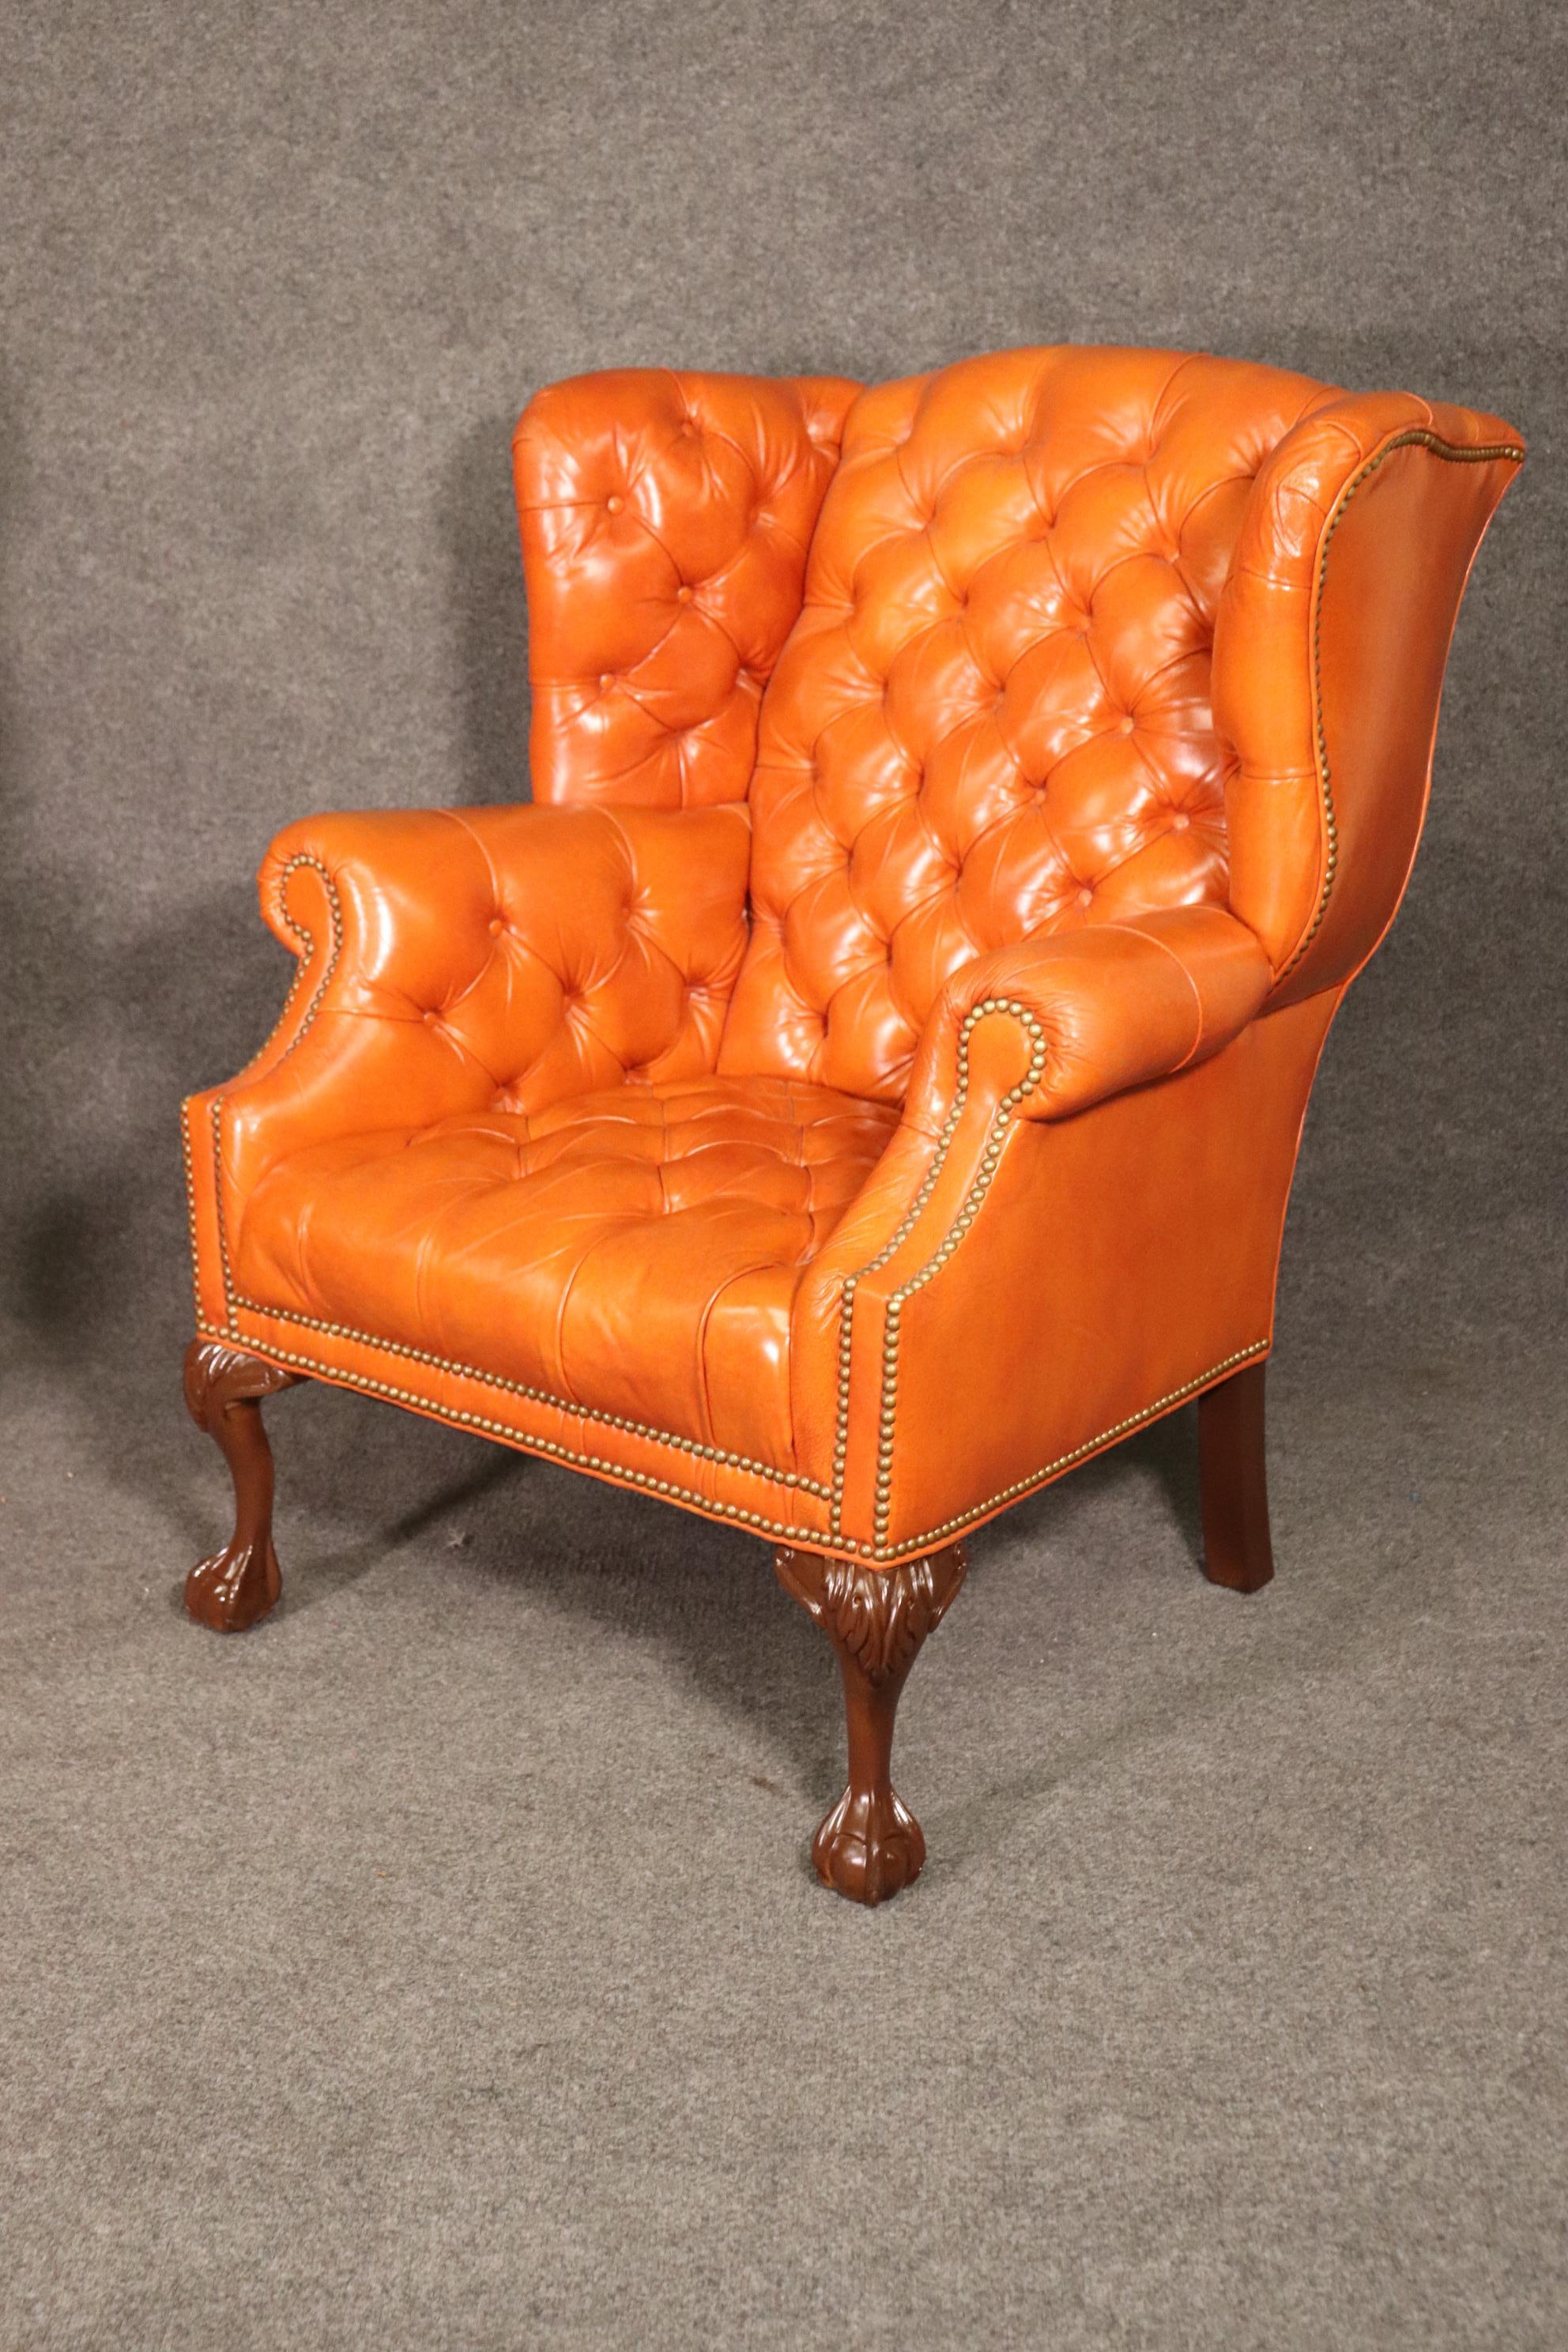 American Very Nice Pair of Orange Chesterfield Wing Back Chairs with one stool